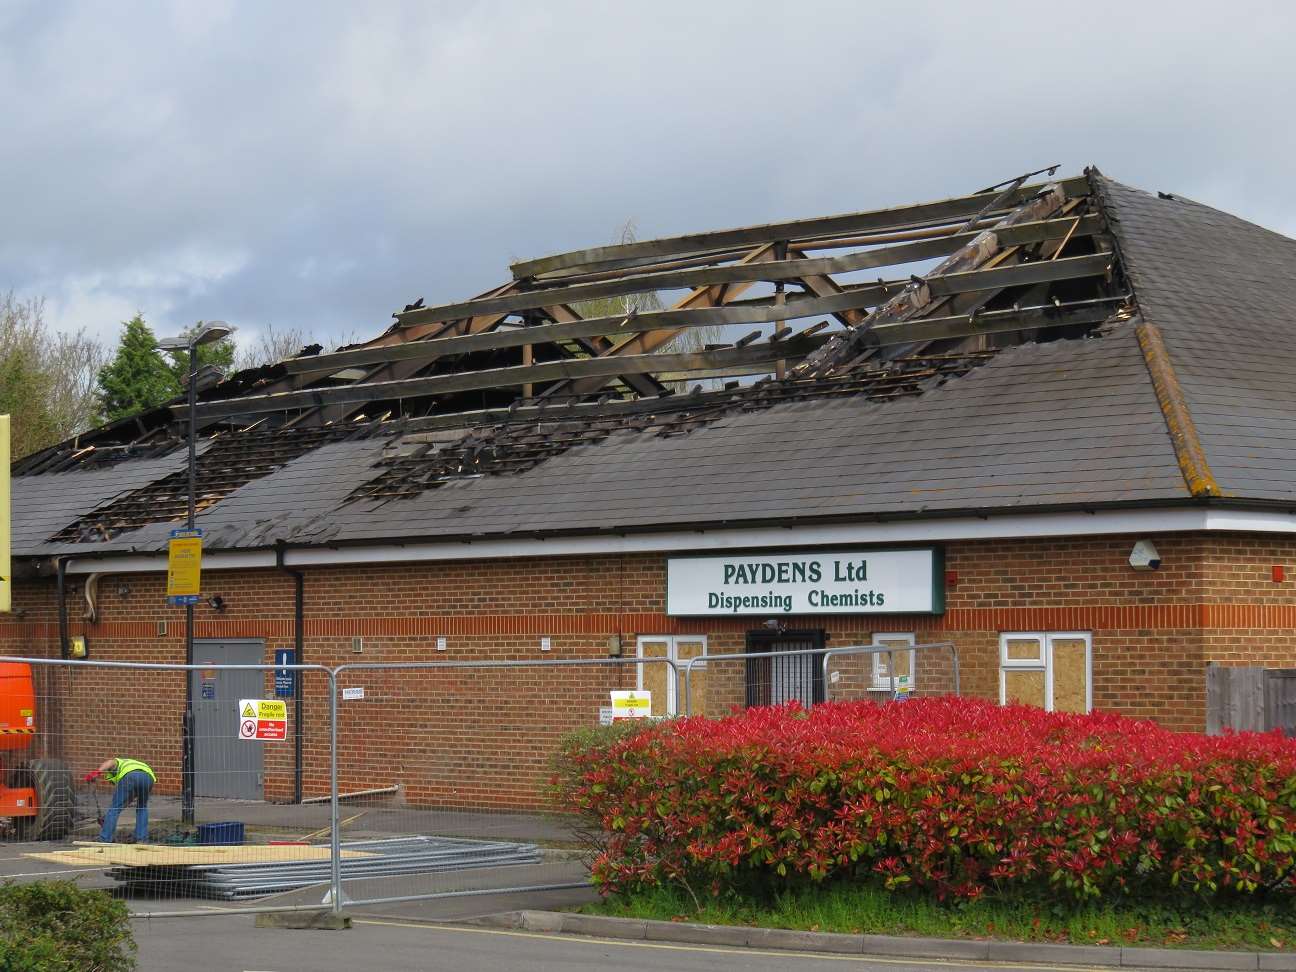 This rear view of the Tesco Express and Paydens pharmacy store in Mace Lane, Ashfoprd shows the extent of the damage to the roof Picture courtesy: Andy Clark